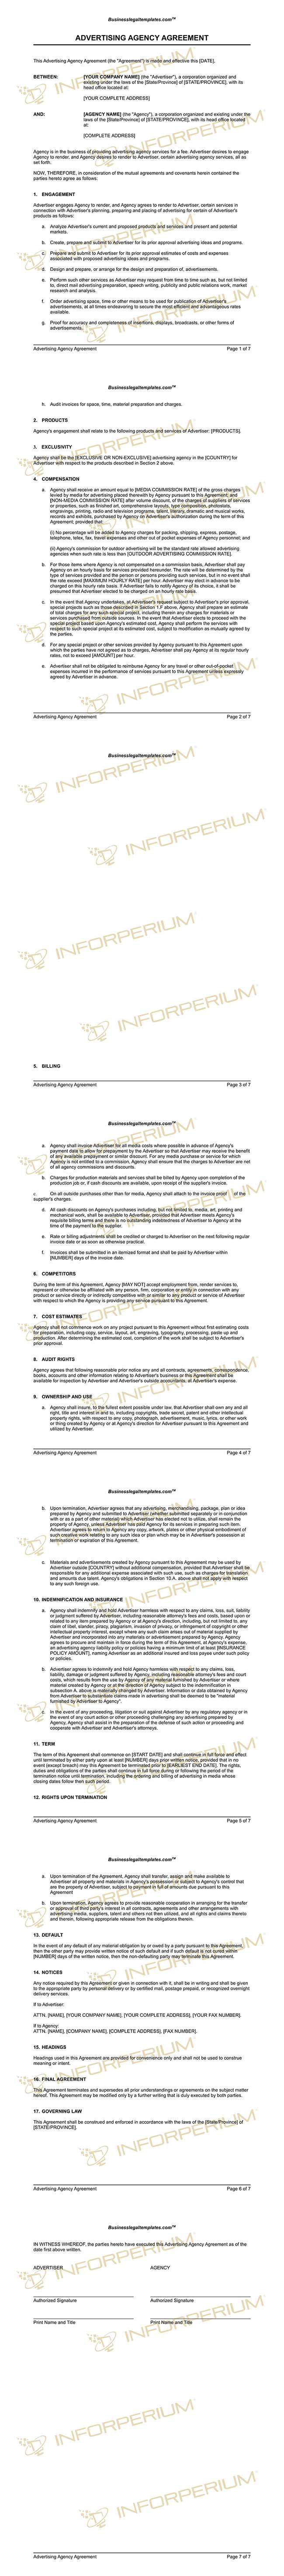 Online Marketing Agreement Best Sales Marketing Documents Agreements Templates Letter